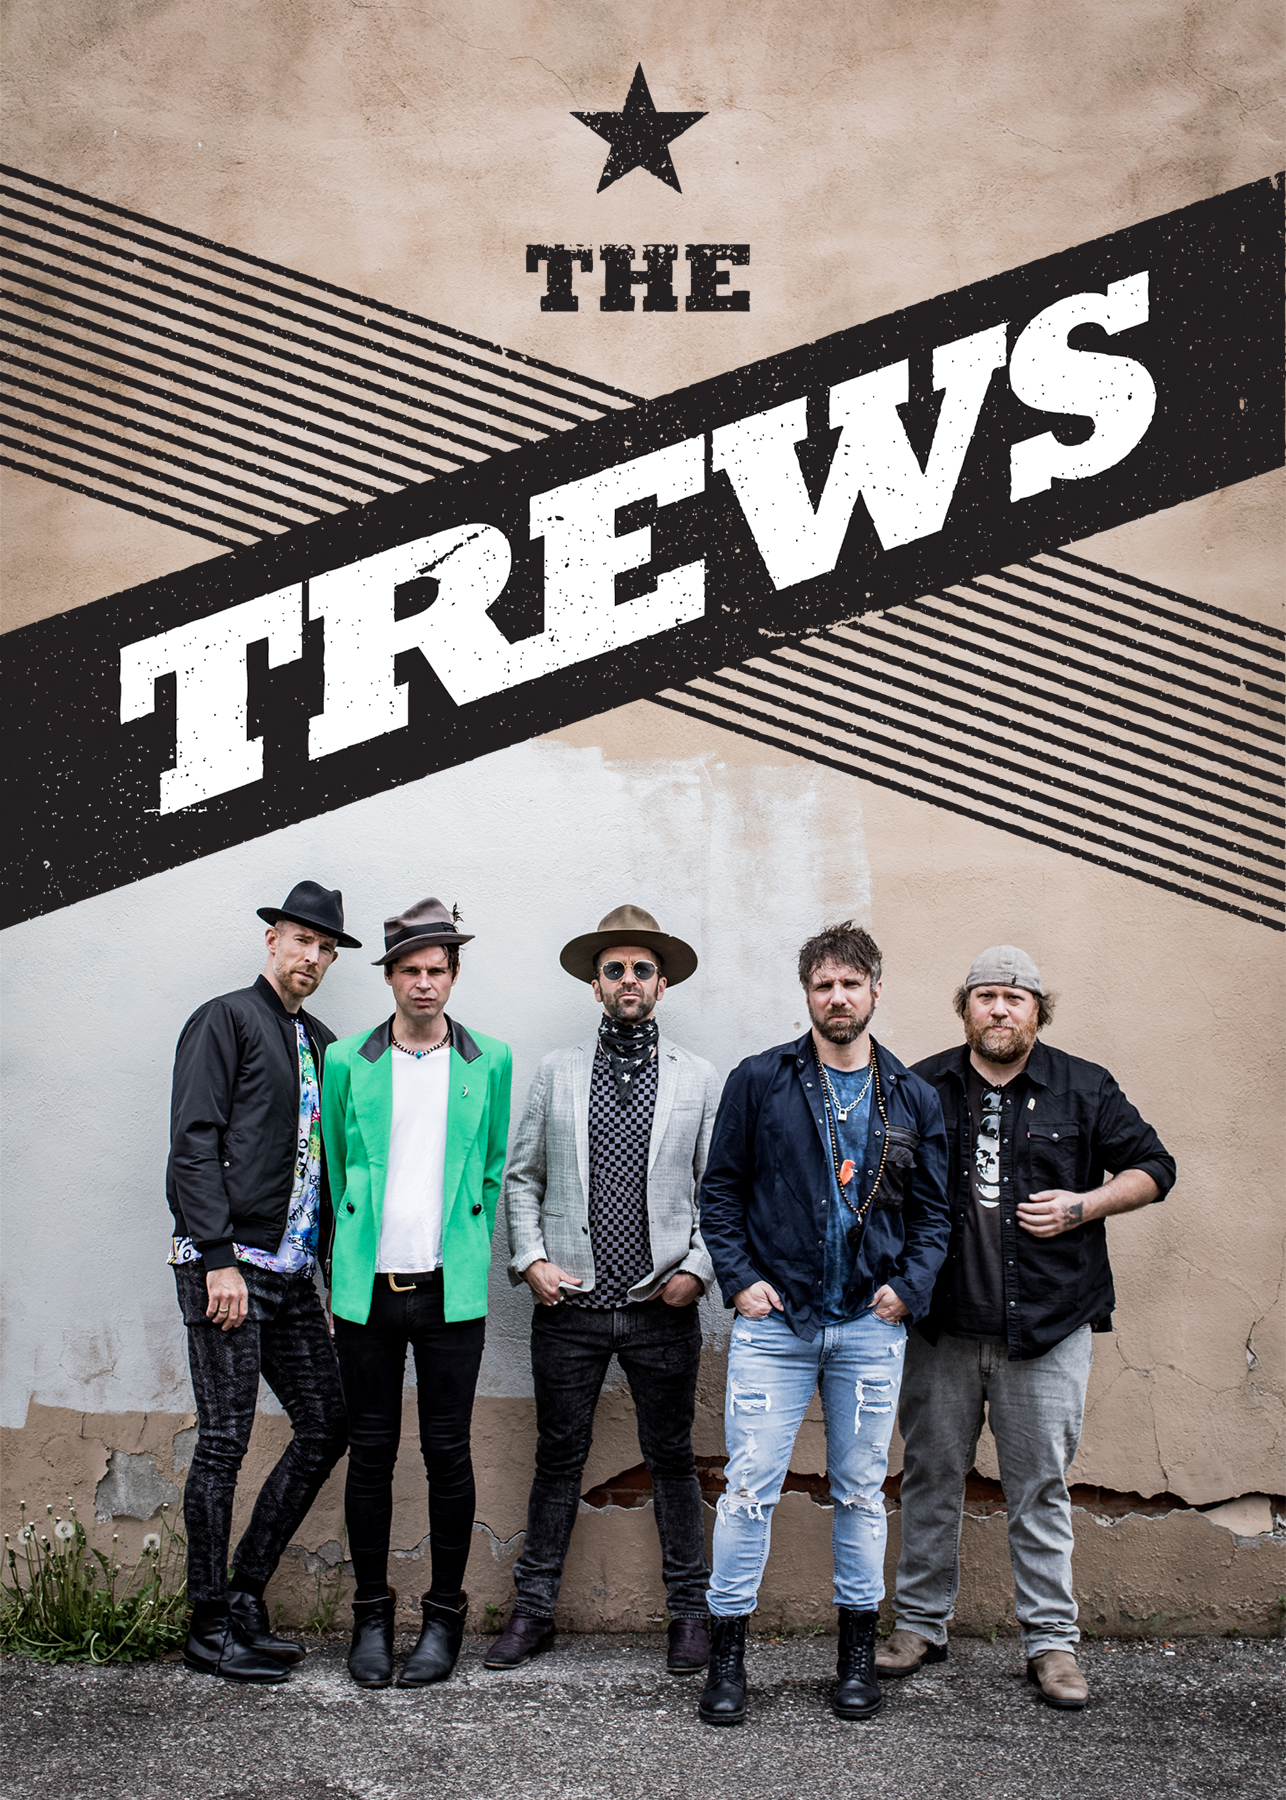 The Trews band with logo